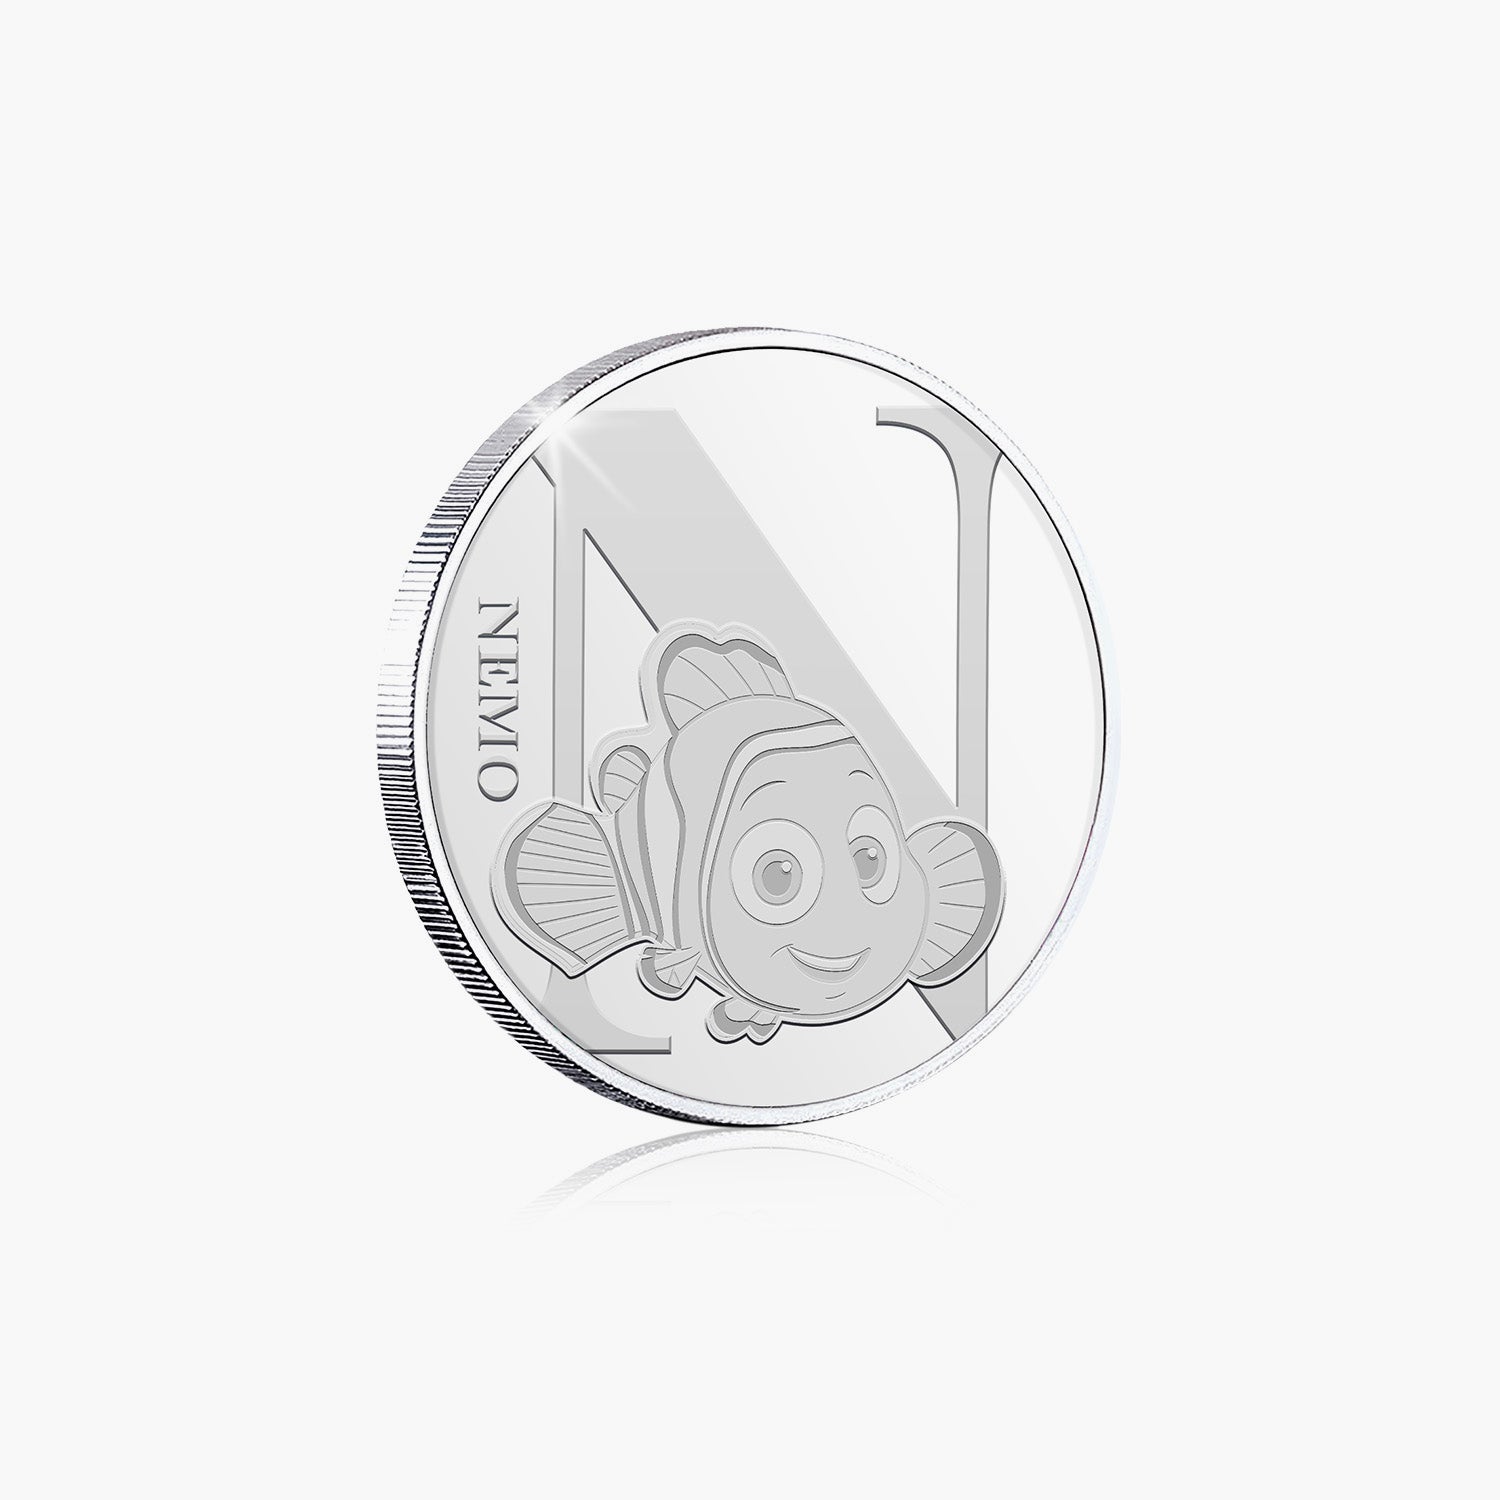 N Is For Nemo Silver-Plated Commemorative